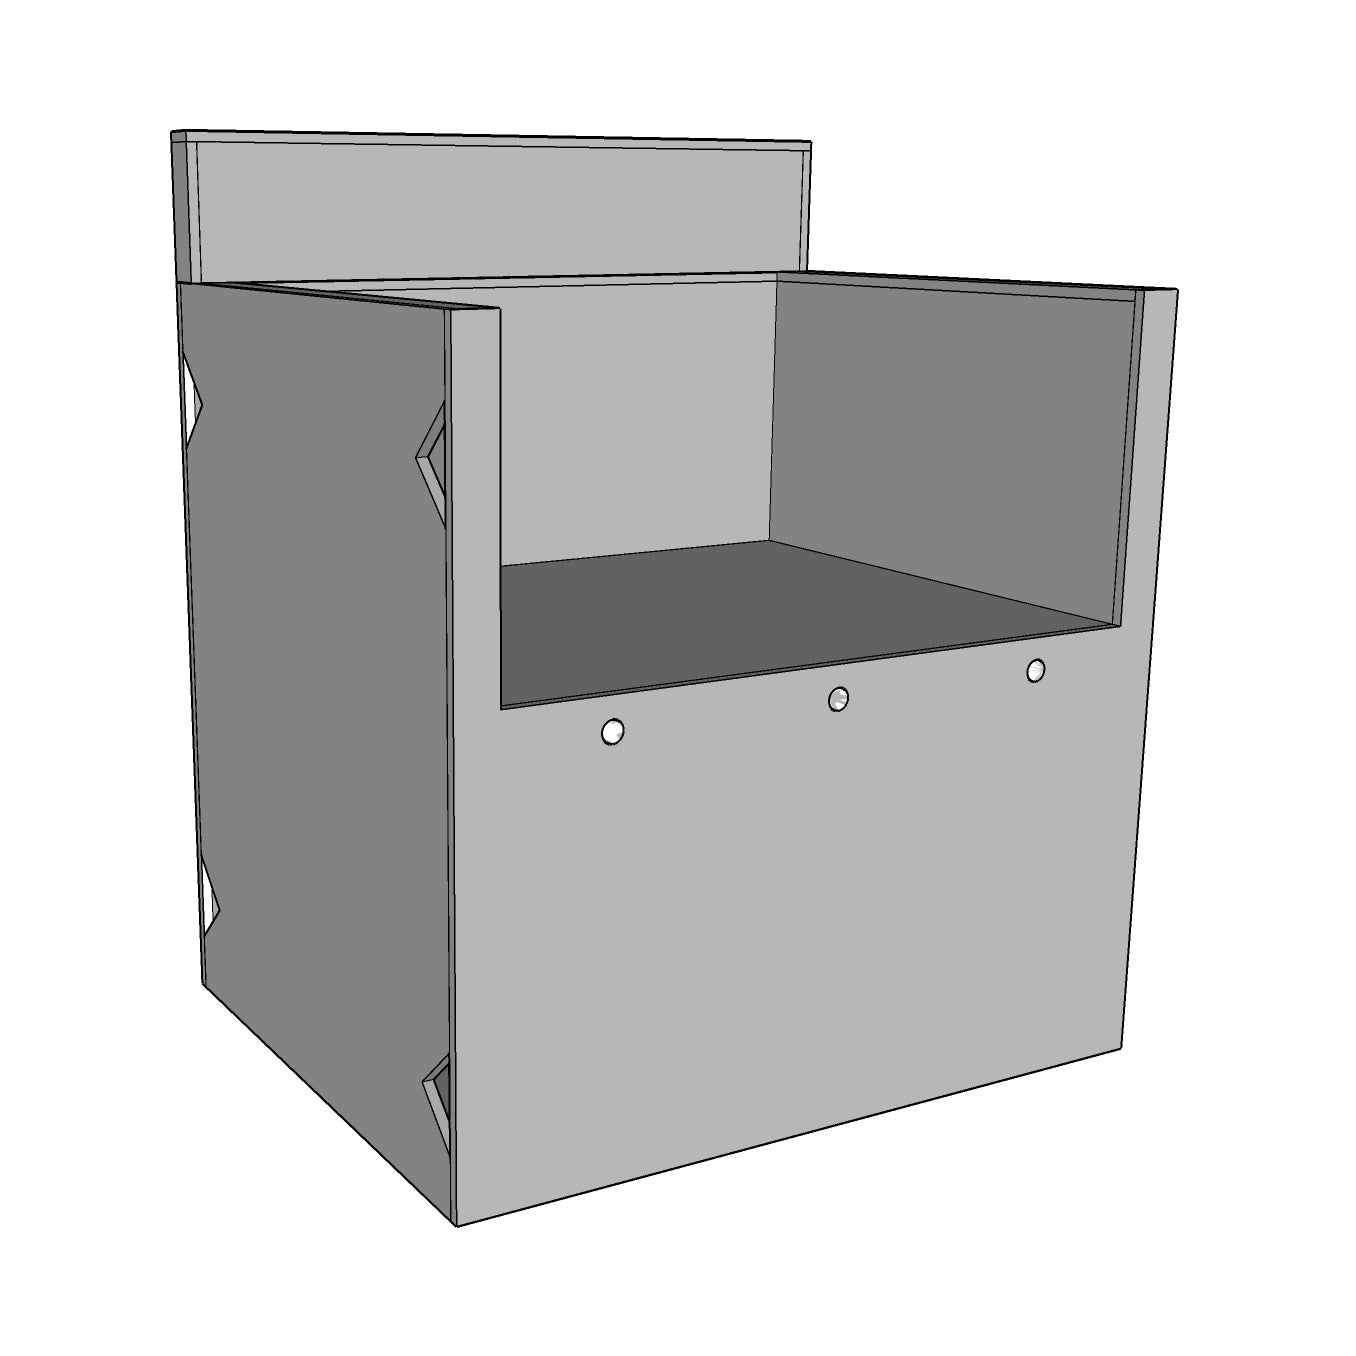 CABINET FOR KAMADO or POWER BURNER for Outdoor Kitchen | Width: 36"or 48" | Height: 36”(STD) or 31”(ADA) | Depth: 29” | Bar and Backsplash Options | Ready to Assemble and Finish